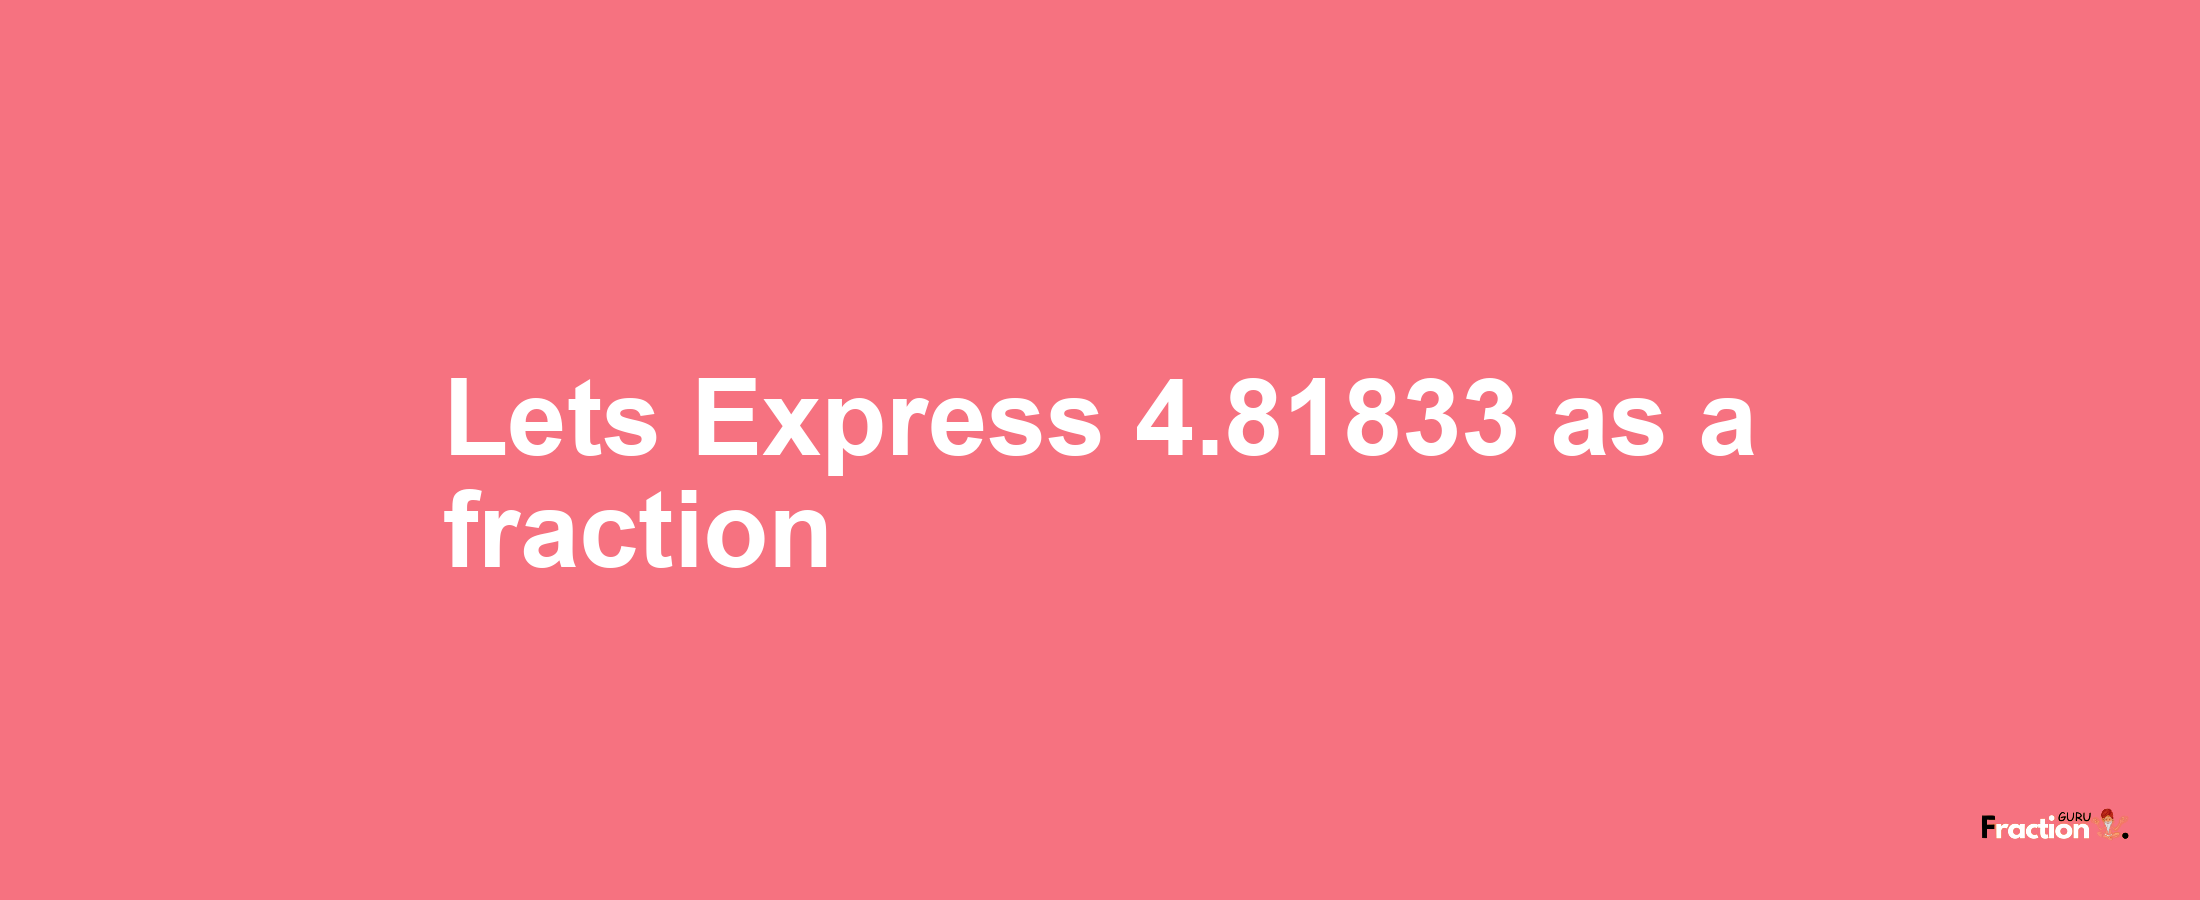 Lets Express 4.81833 as afraction